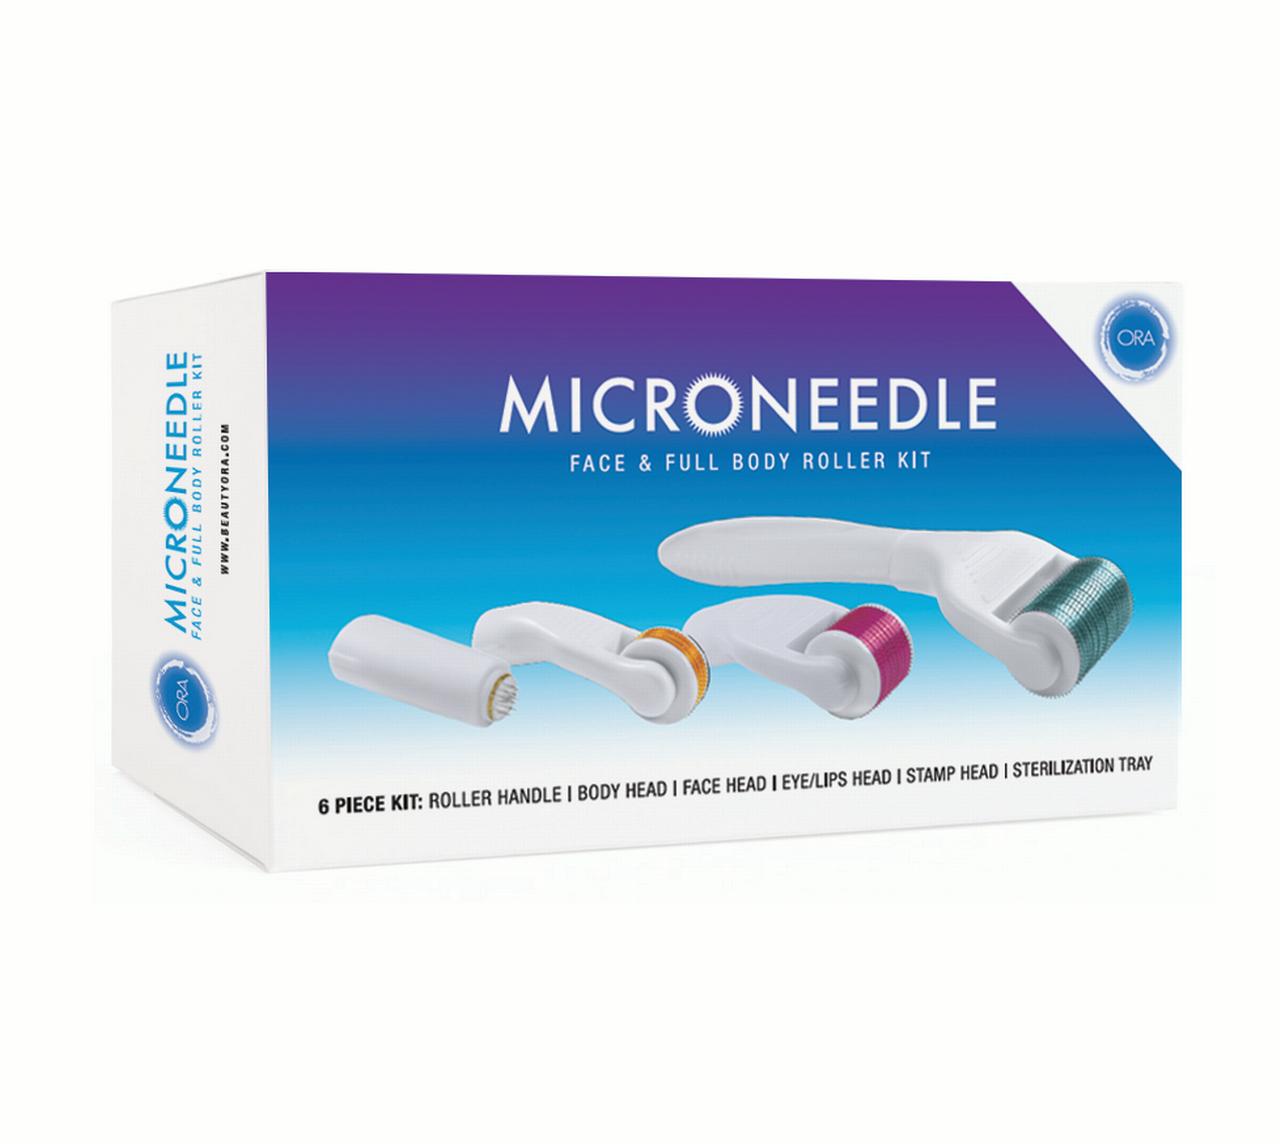 ORA Microneedle Face & Full Body Roller 6-Piece Kit - image 2 of 2